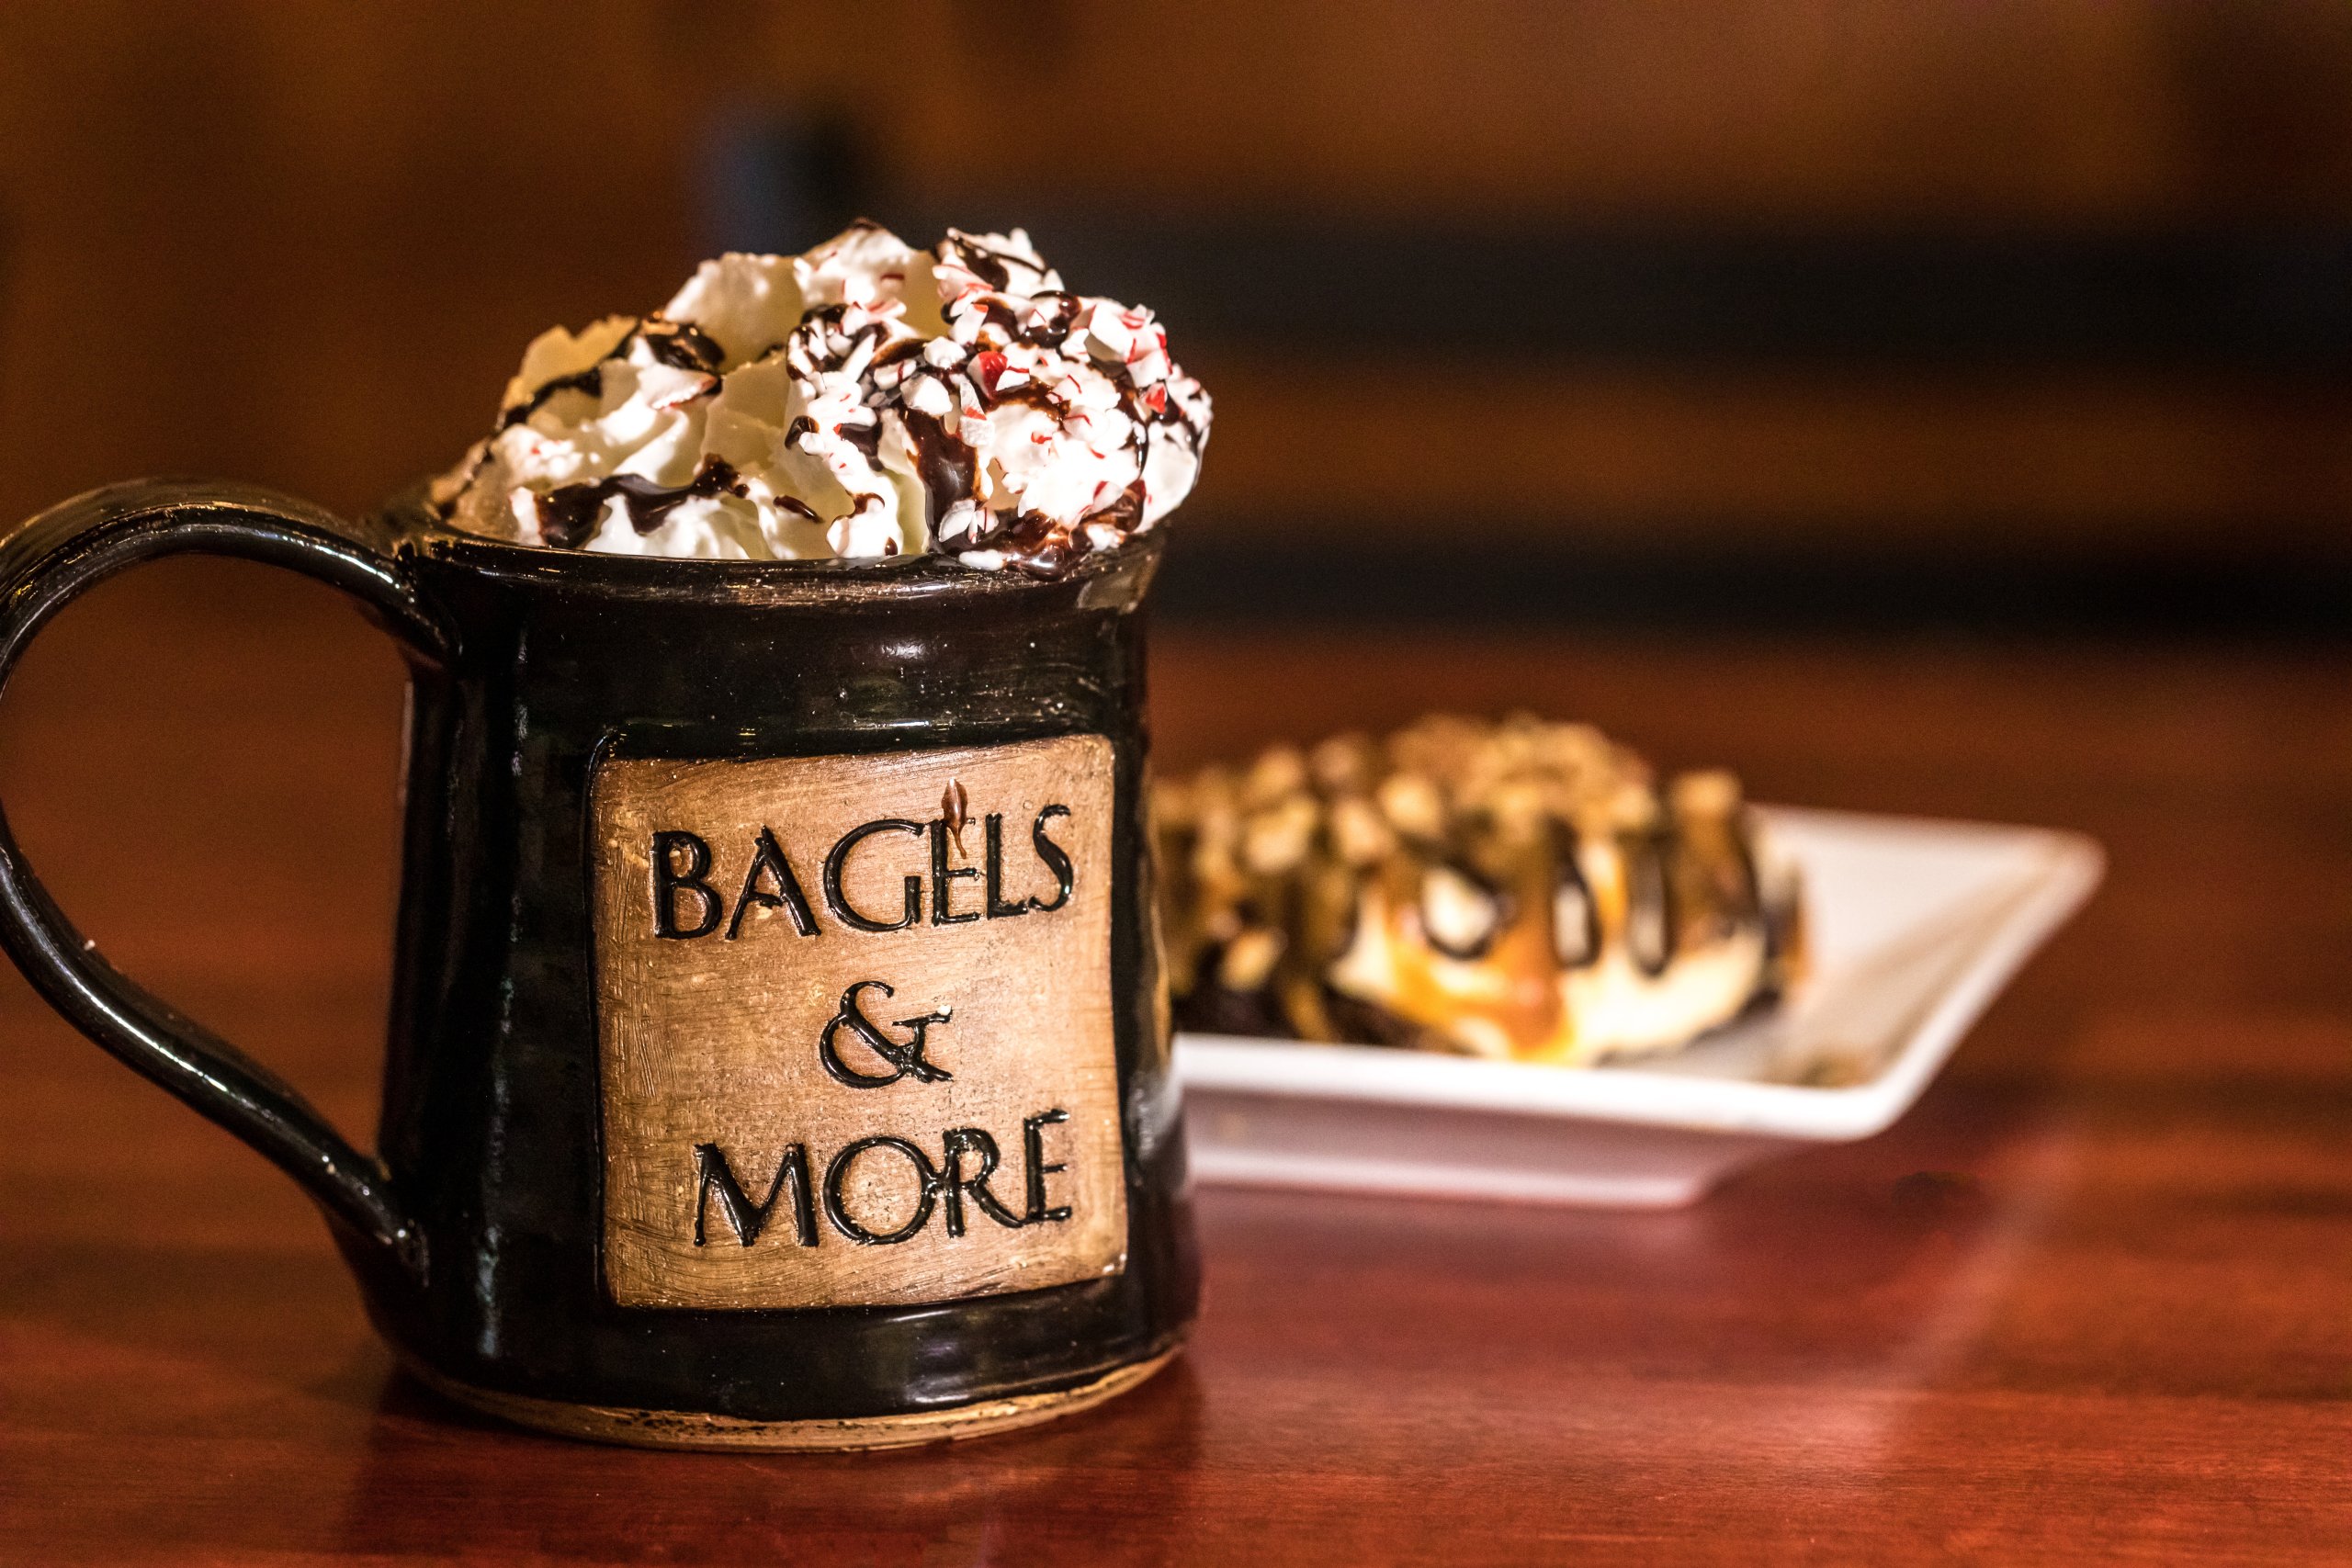 Bagels and More coffee cup is topped with whipped cream with chocolate drizzle and peppermint crumbs sits in front of a plate of pastry.